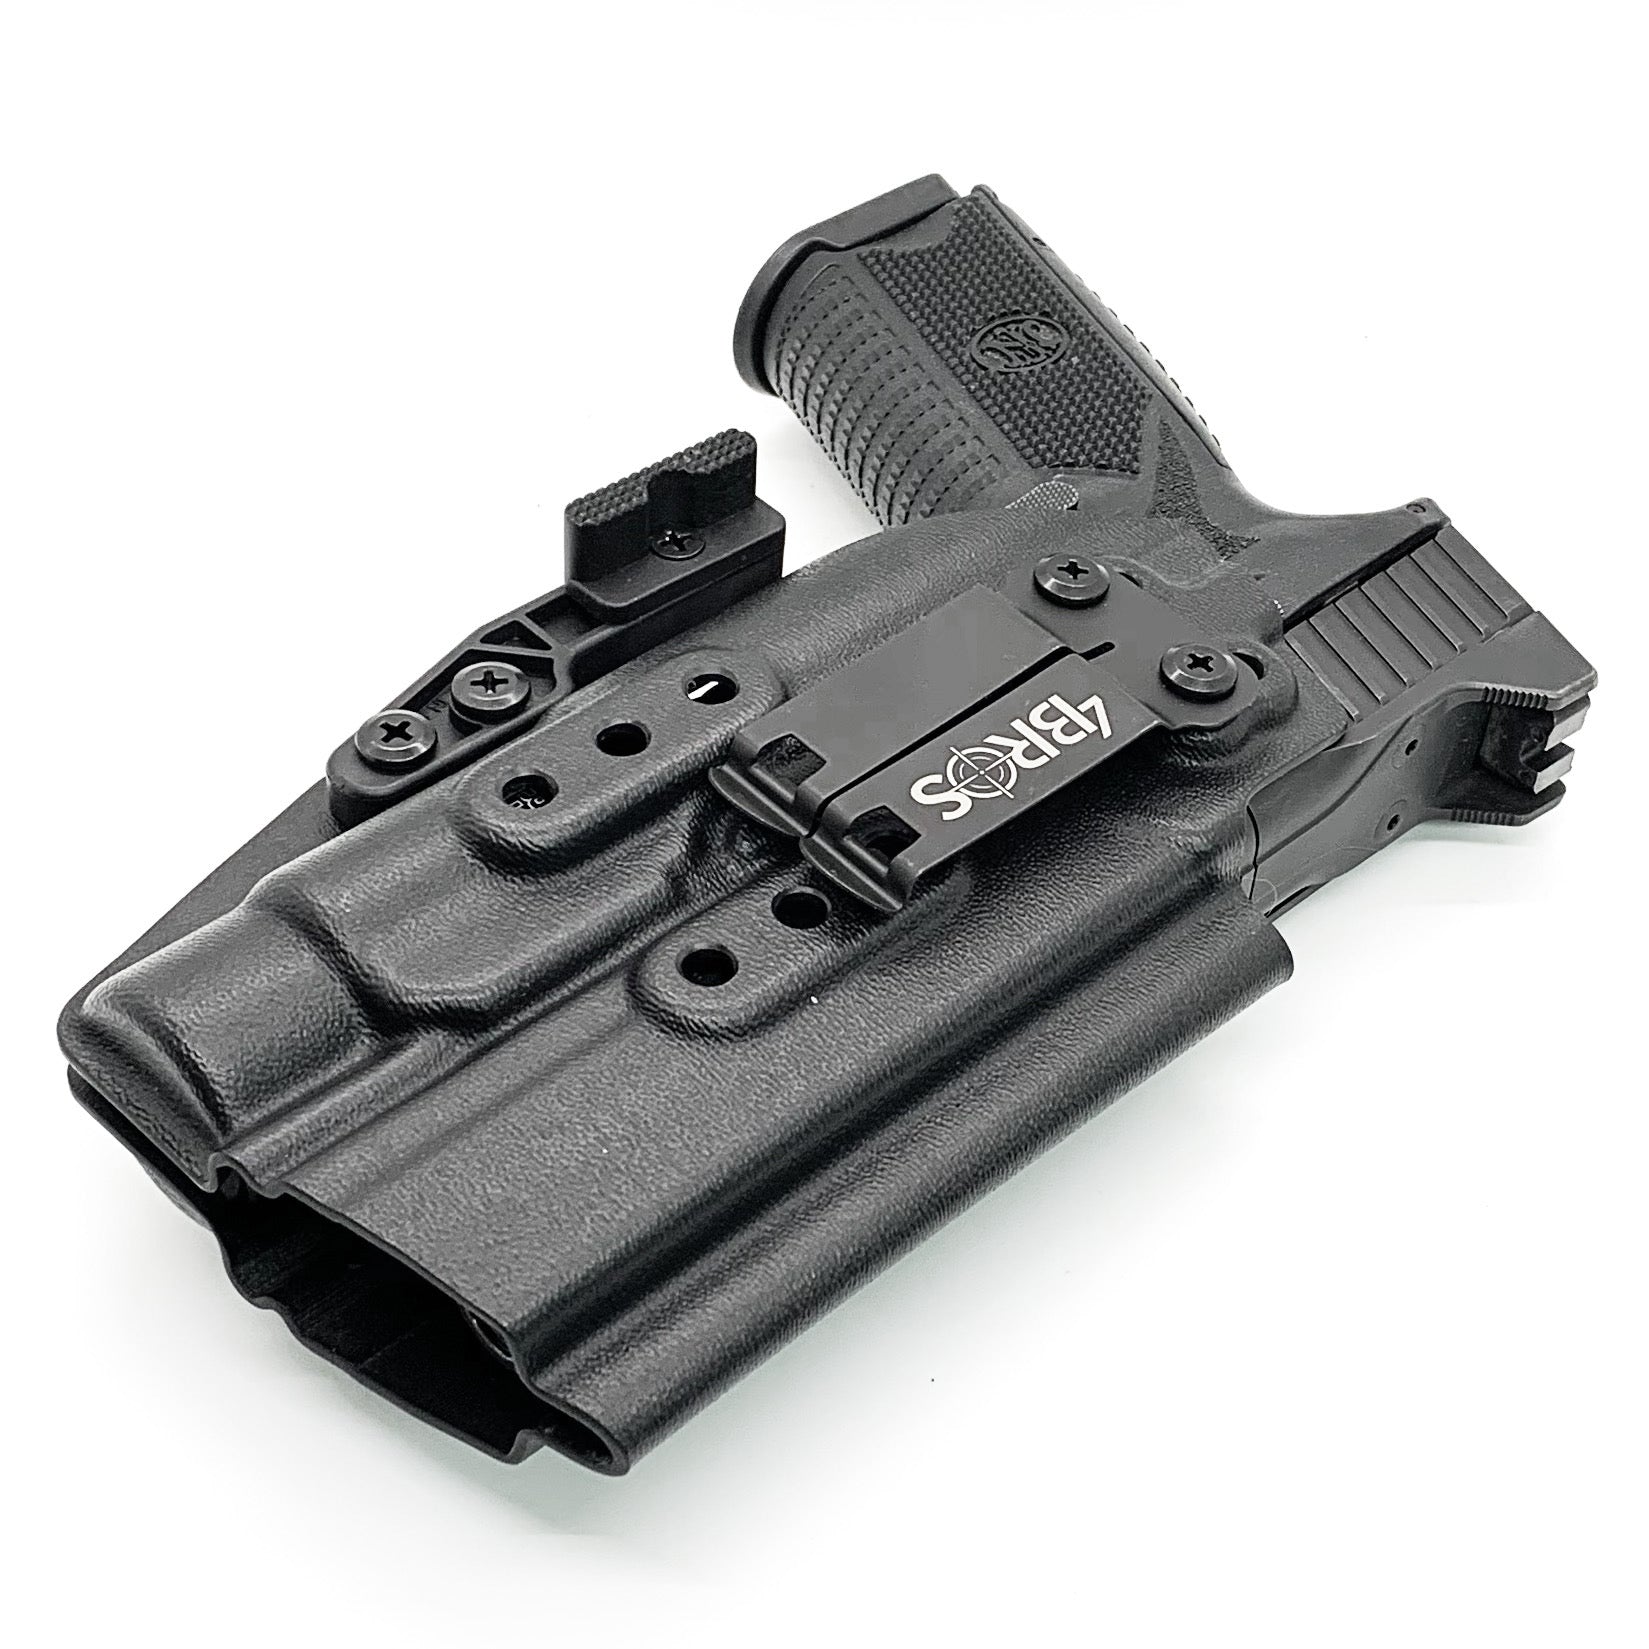 Inside Waistband Taco Style Holster designed to fit the FN 509  and FN 509 Tactical with the Streamlight TLR-1 or TLR-1 HL attached to the pistol. The holster retention is on the light itself and not the pistol, the holster will not work without the light mounted on the firearm.  Proudly made in the USA.